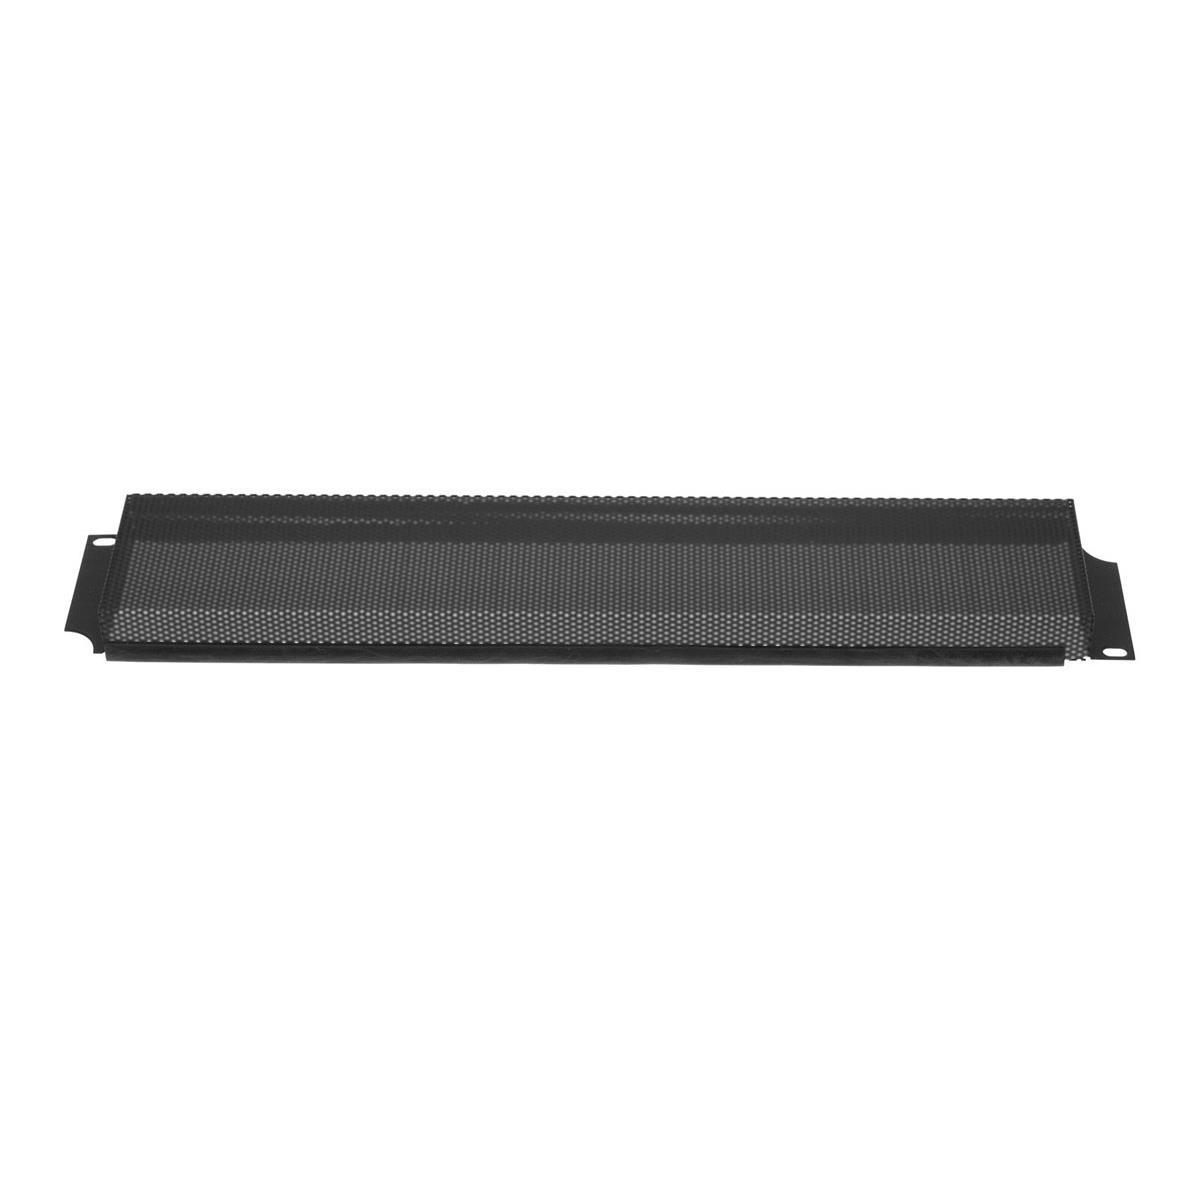 Image of Lowell Manufacturing SSC-4V 4U Rack Panel Security Cover